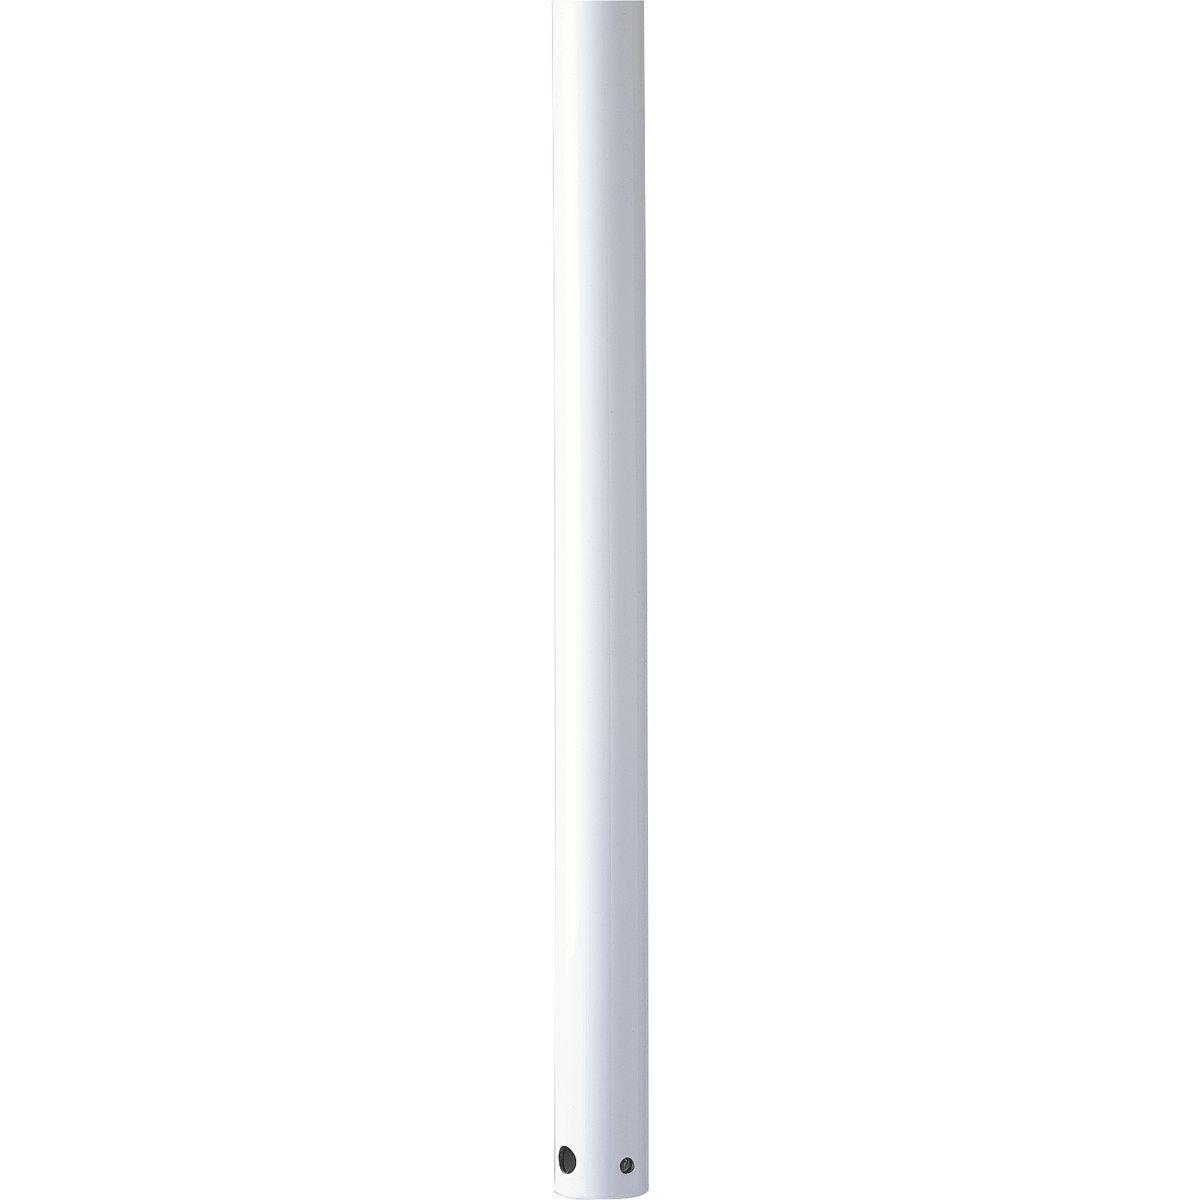 Hubbell P2605-28 3/4 In. x 24 In. downrod for use with any Progress Lighting ceiling fan. Use of a fan downrod positions your ceiling fan at the optimal height for air circulation and provides the perfect solution for installation on high cathedral ceilings or in great ro